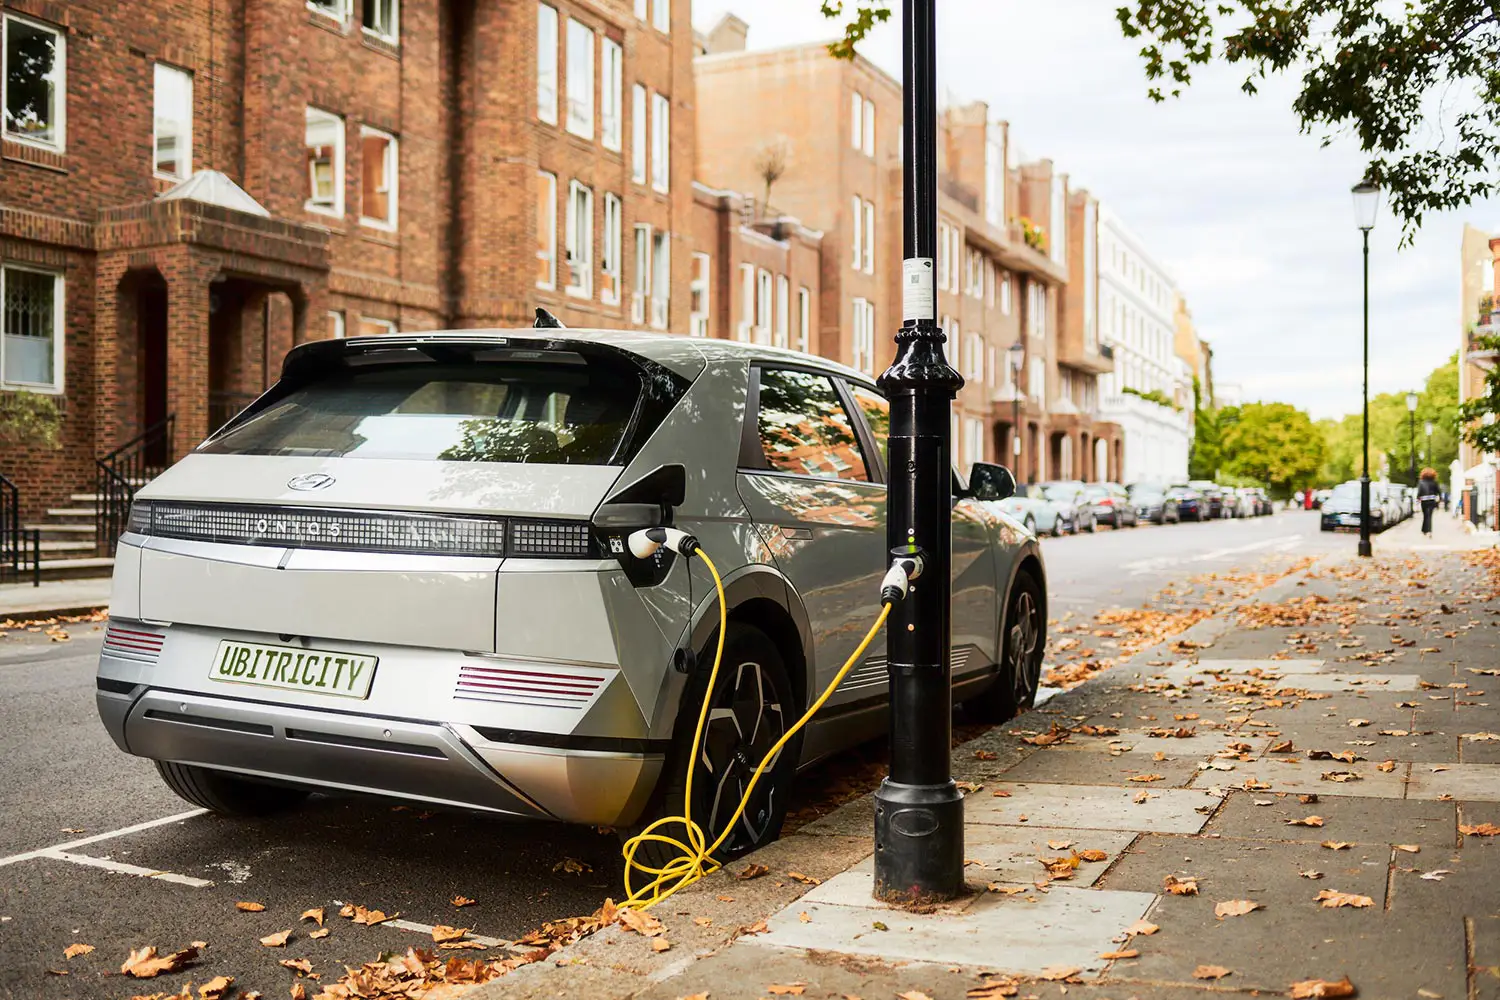 Liverpool to have one of the UK’s largest electric vehicle charging networks as ubitricity trebles city’s capacity